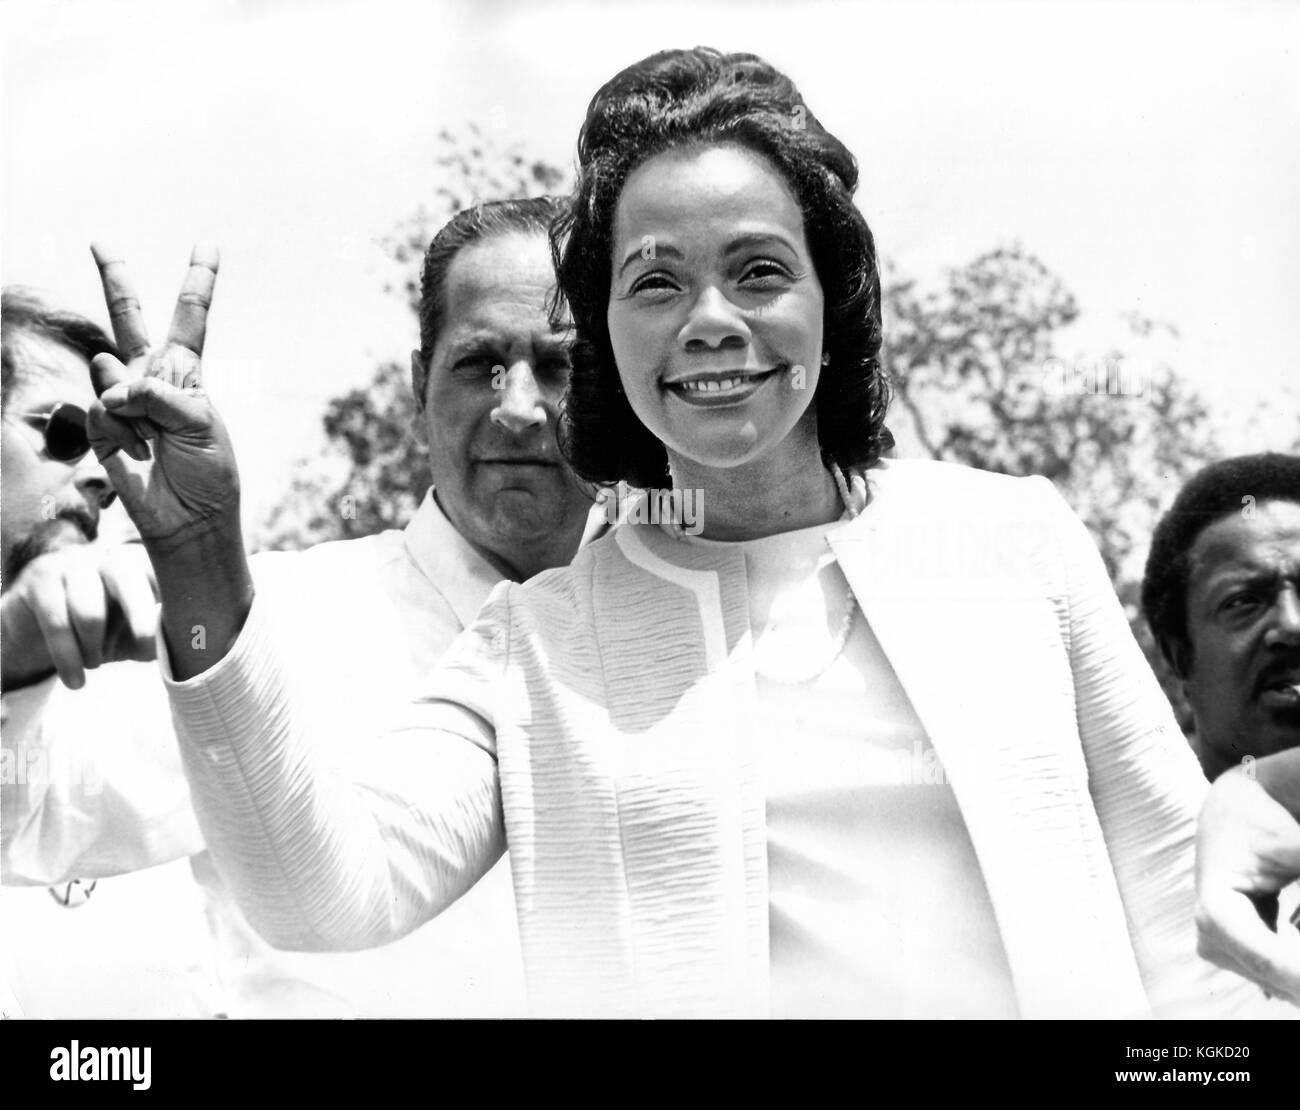 Washington, D.C. - January 31, 2006 -- Coretta Scott King has passed away in Atlanta, Georgia at age 78.  This file photo, taken in Washington, D.C.  on May 9, 1970 shows Mrs. Martin Luther King (Coretta Scott) flashing the victory sign as she attended an anti-war rally at the White House. She was one of over 100,000 demonstrators who attended the rally to protest the war in Vietnam and Cambodia..Credit: Benjamin E. 'Gene' Forte - CNP /MediaPunch Stock Photo